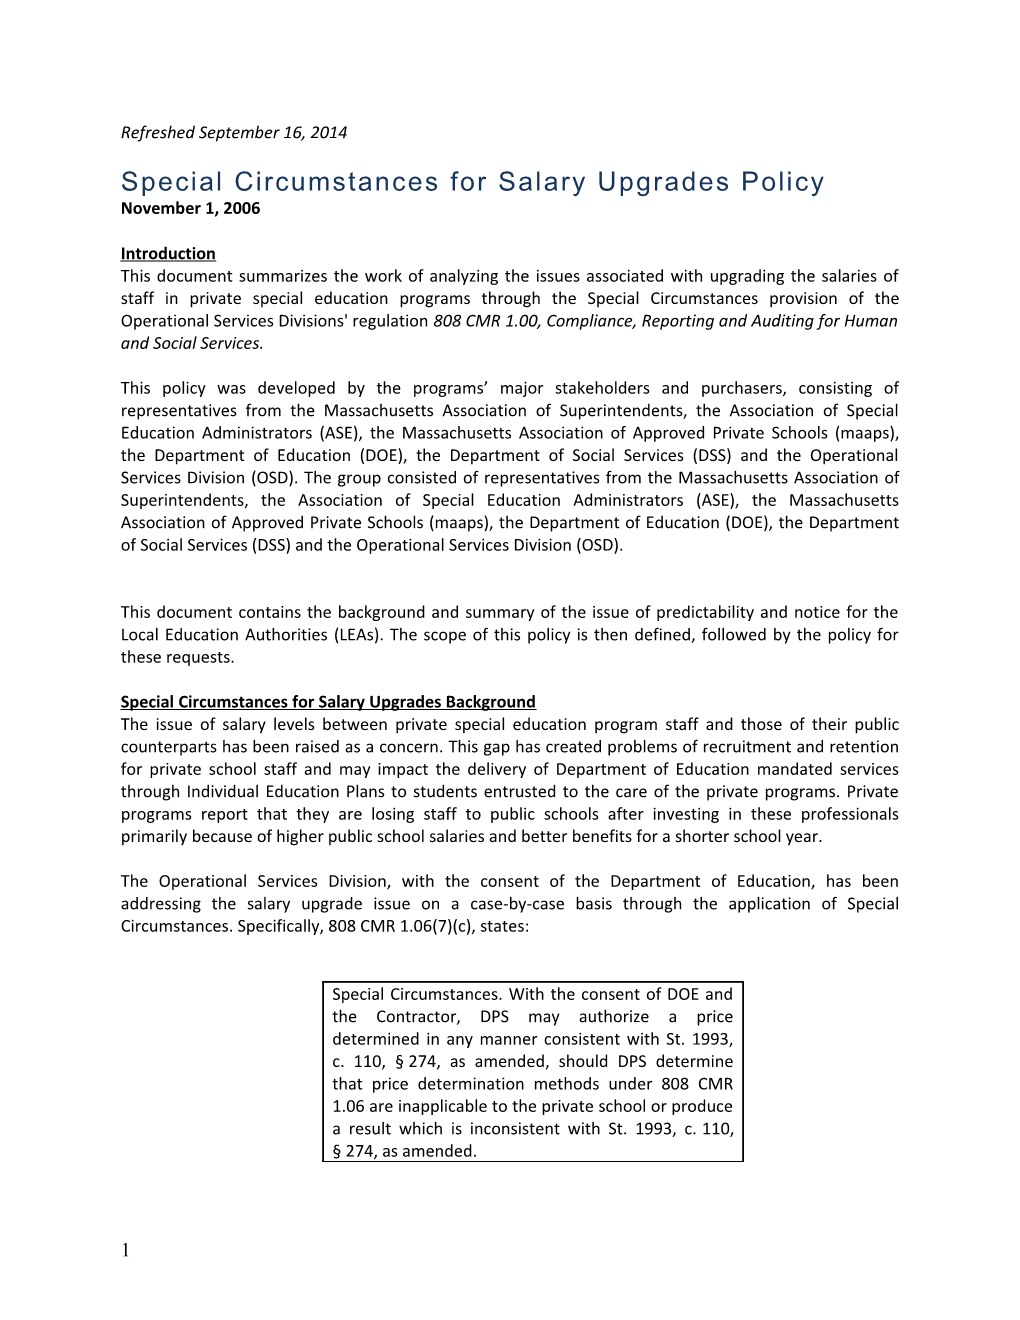 Special Circumstances for Salary Upgrades Policy